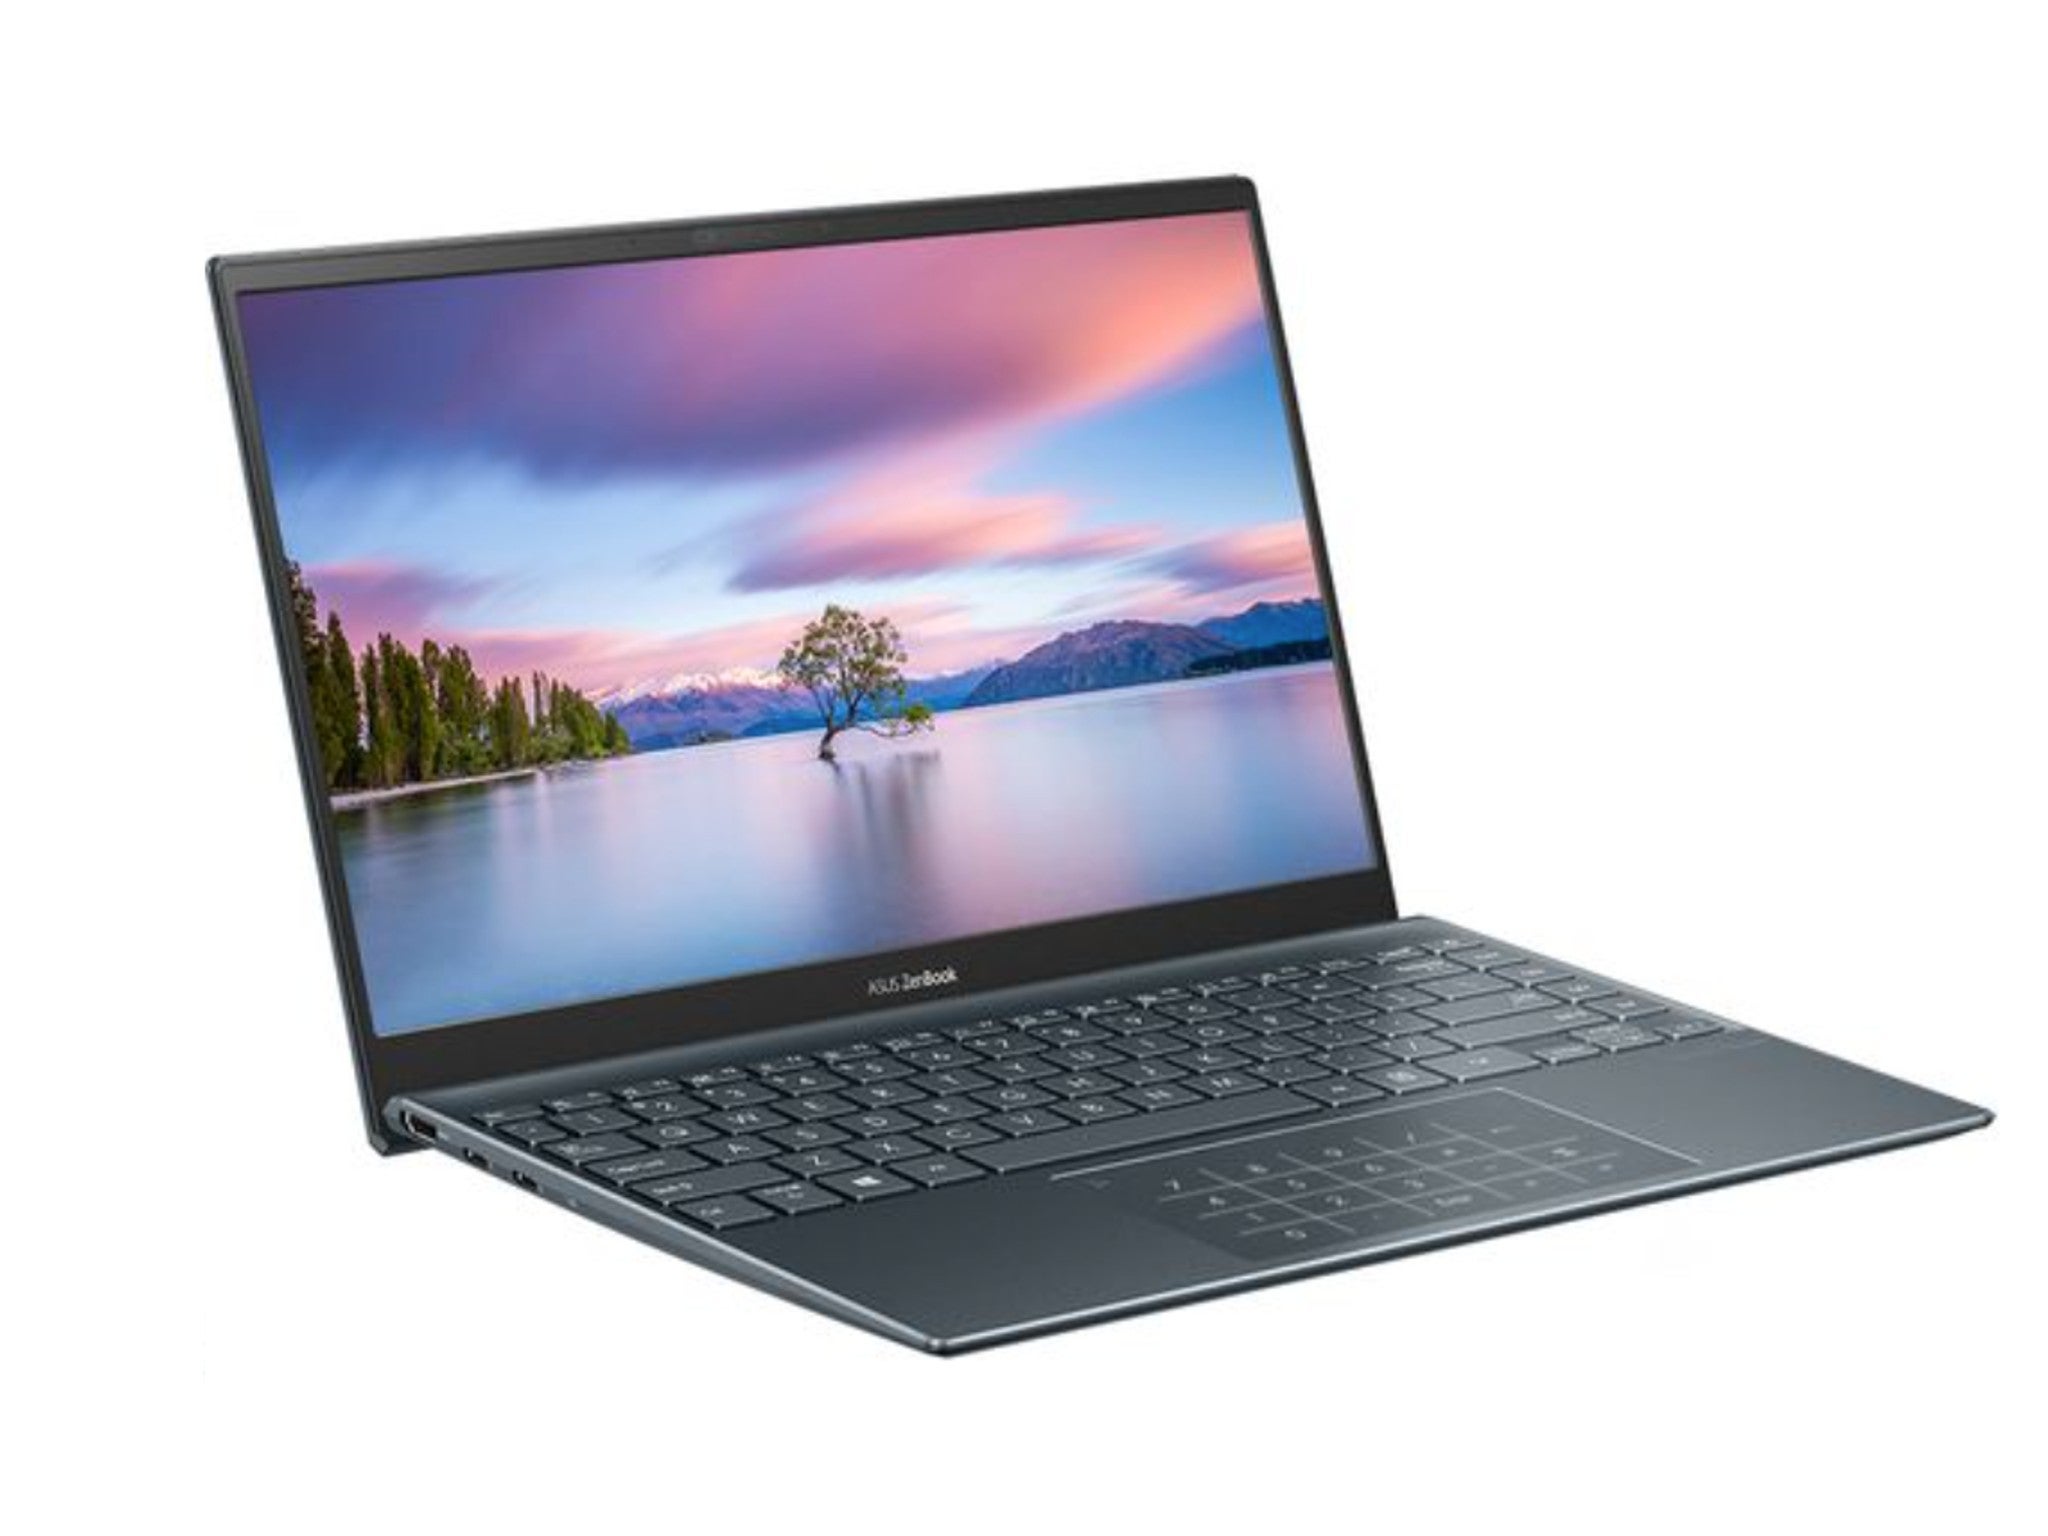 Asus zenbook 5. ASUS ZENBOOK ux425. ASUS ZENBOOK 14 ux425ea. ASUS ZENBOOK 14 ux425ja-bm040t. ASUS ZENBOOK 14 ux425ea (ux425ea-hm039t).